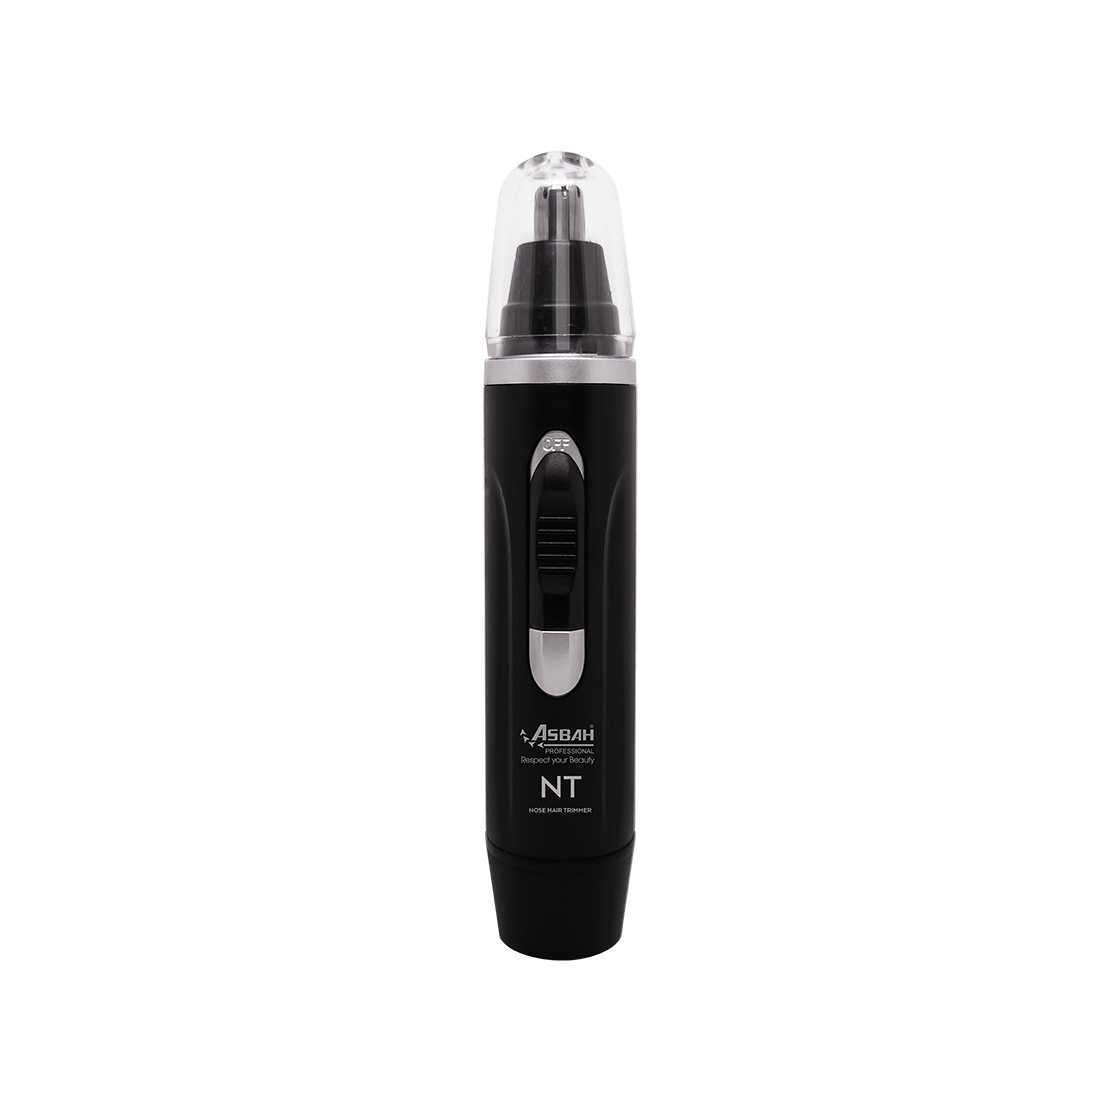 Buy NT NOSE HAIR TRIMMER in India at Best Prices | Asbah Beauty Products